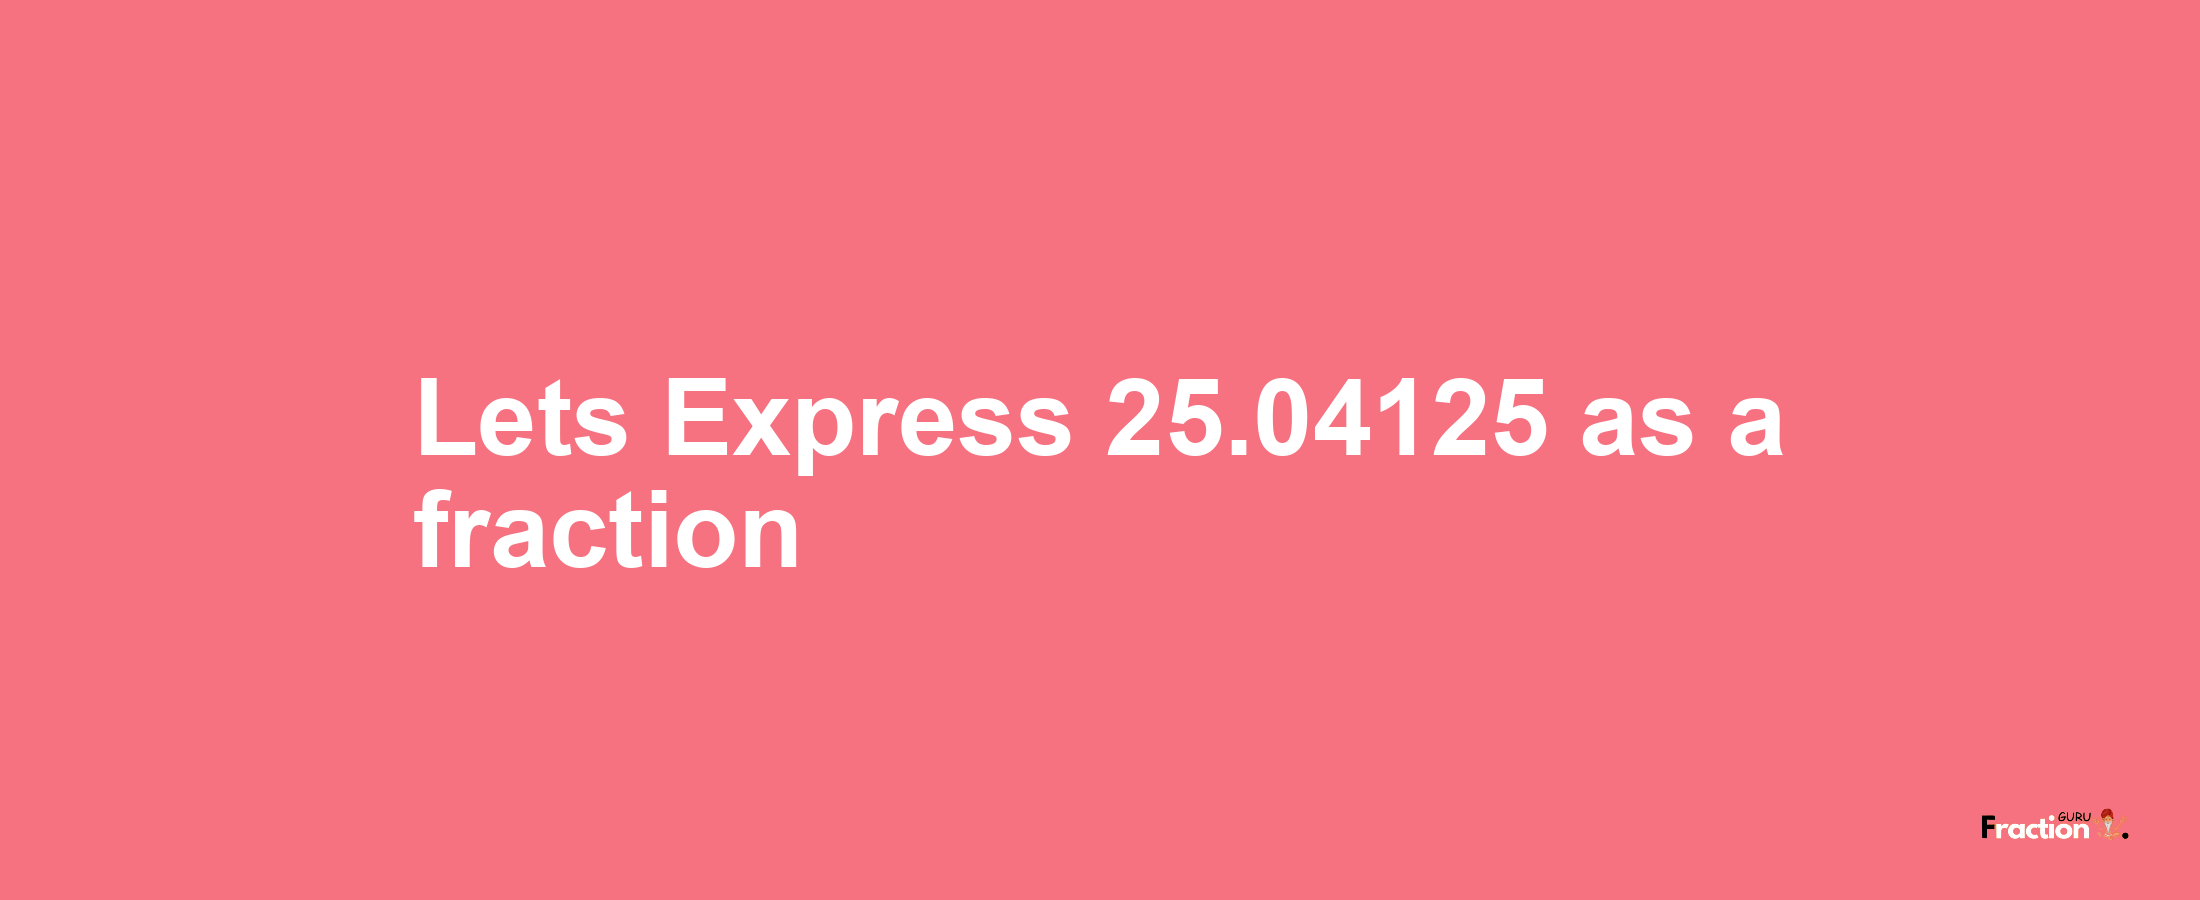 Lets Express 25.04125 as afraction